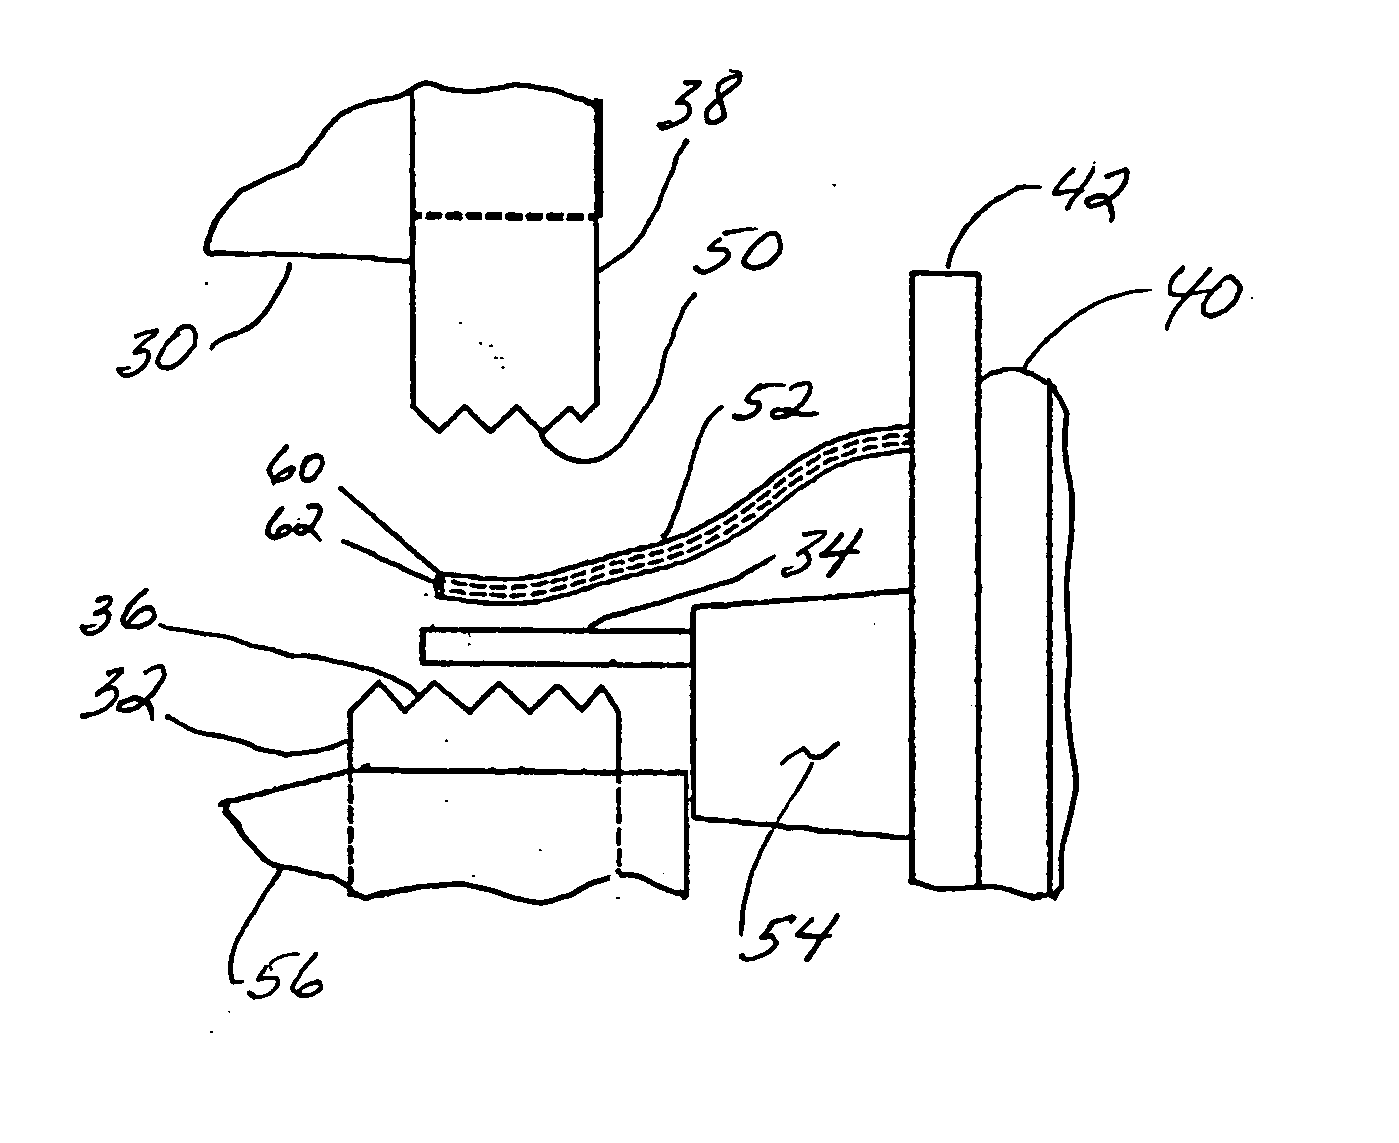 Apparatus and method for connecting coated wires